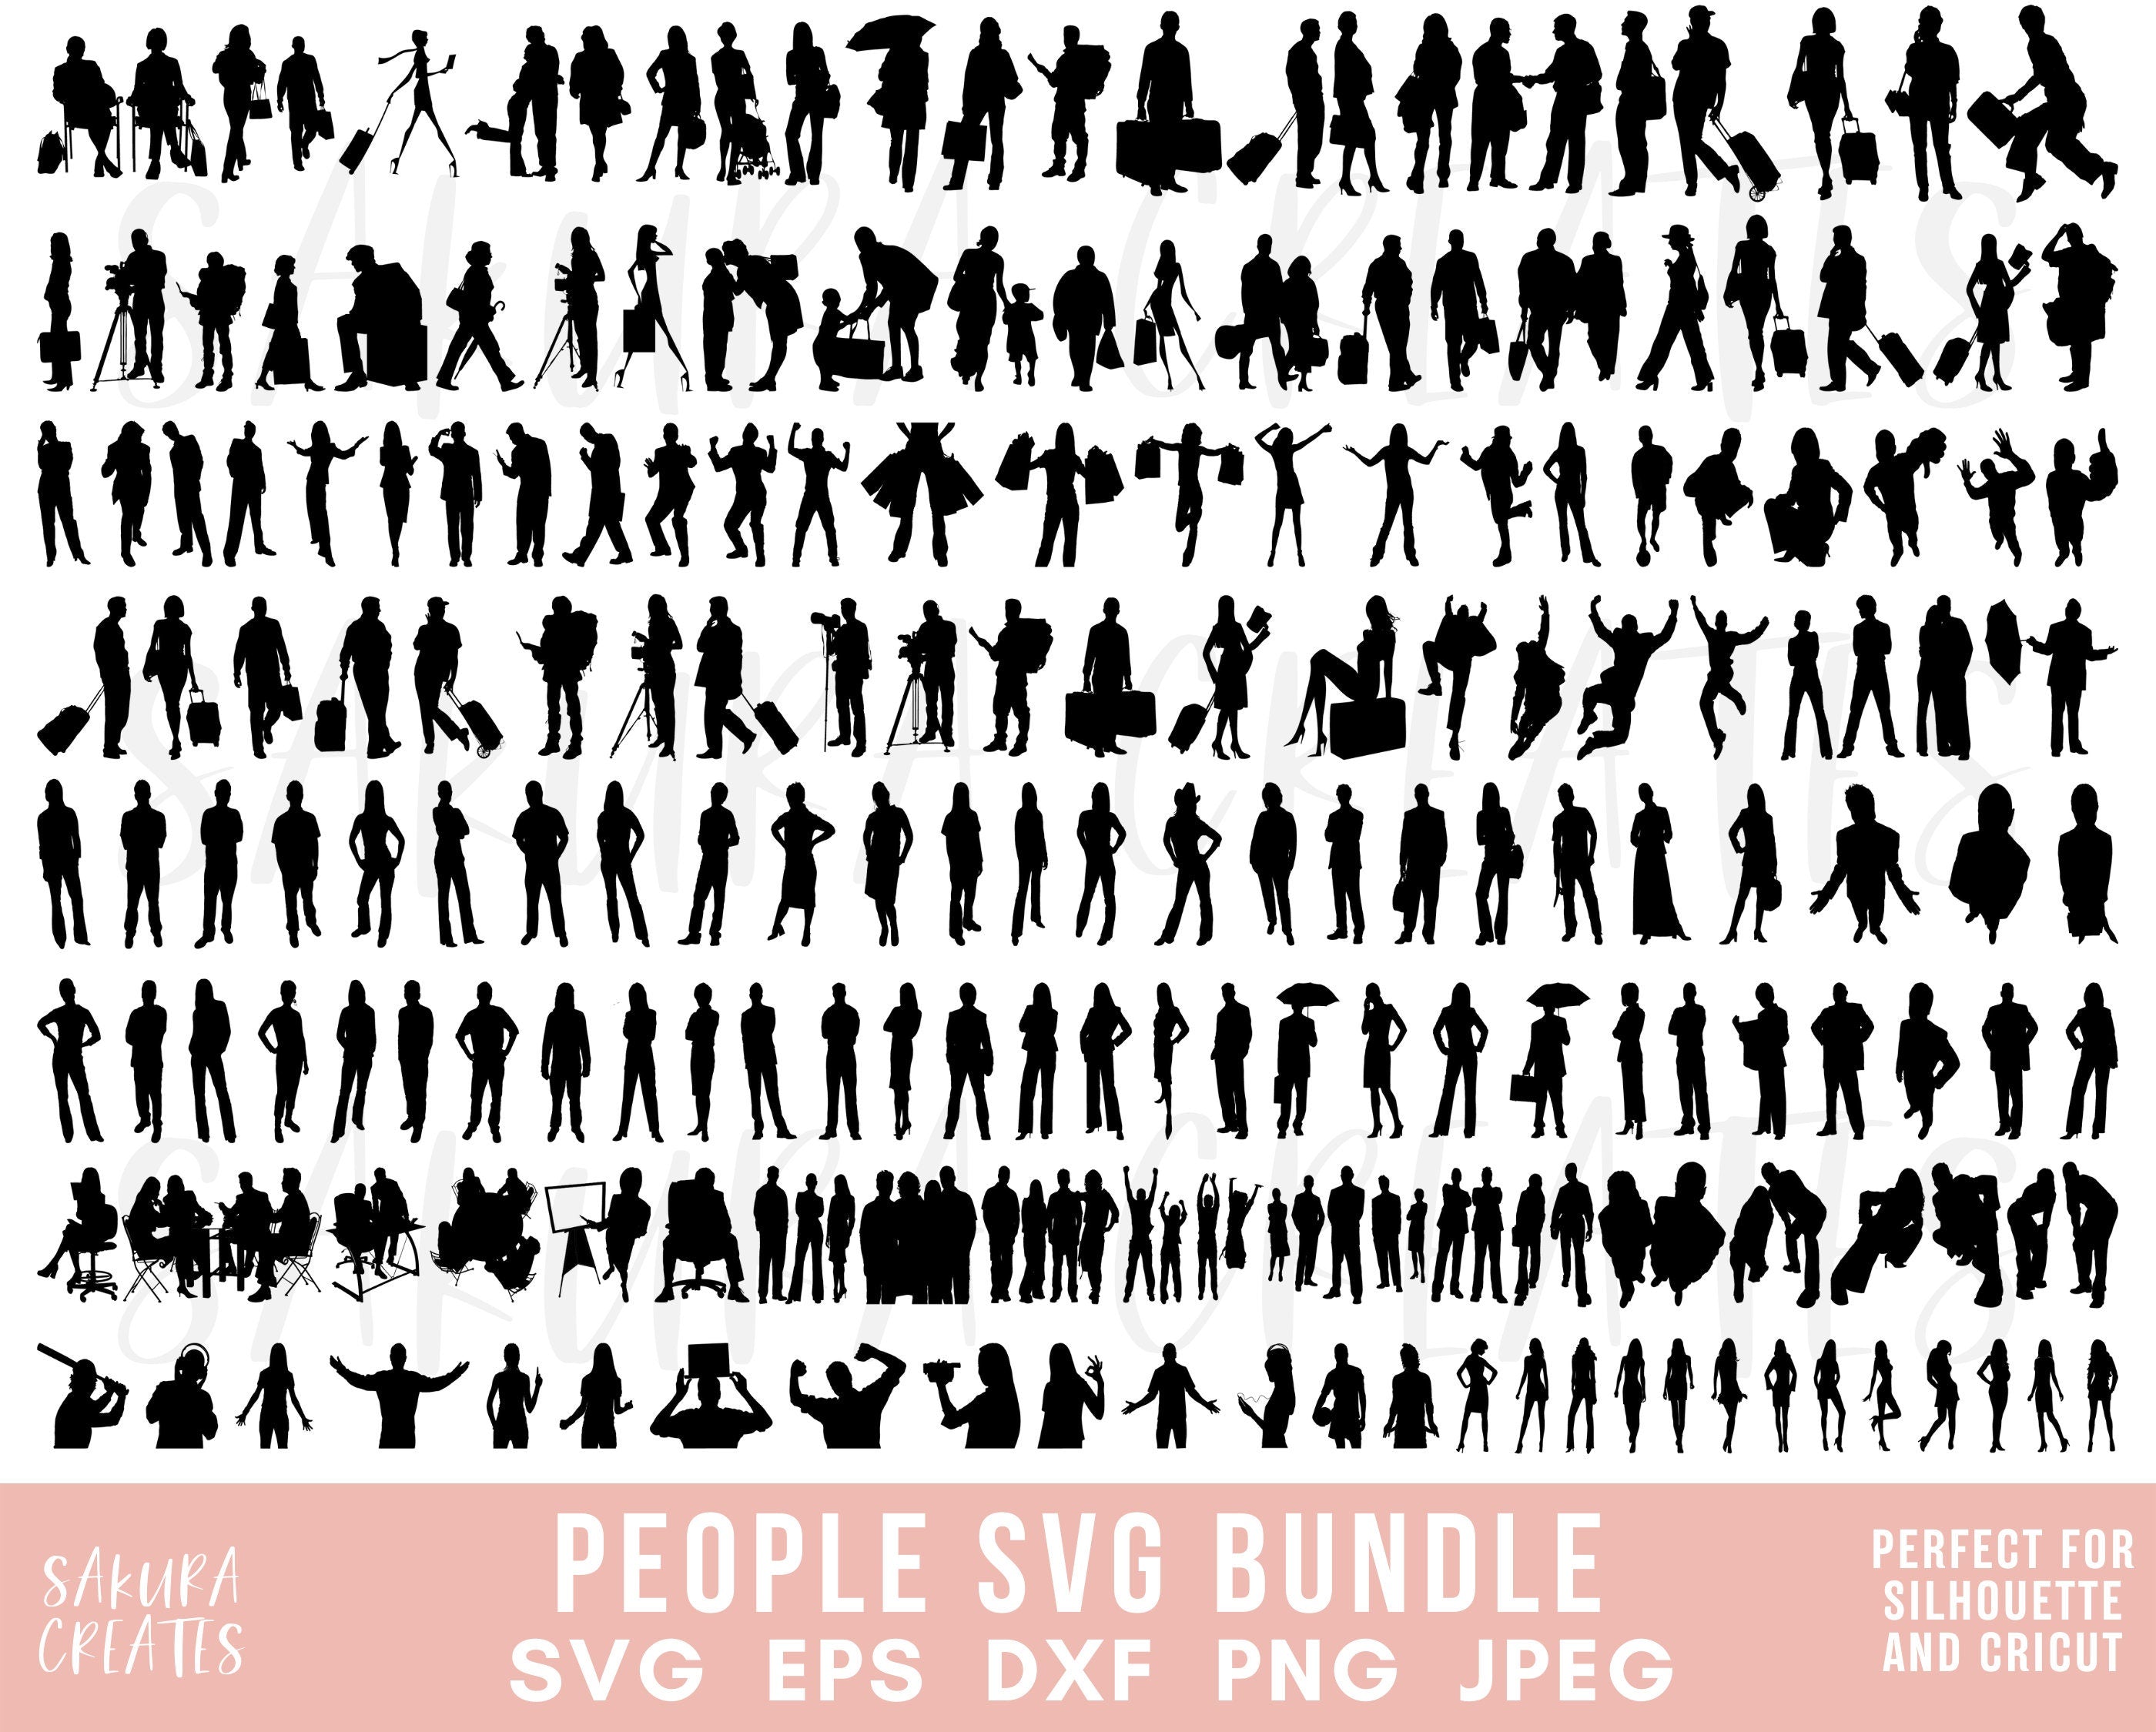 Flat Icon - Flat Vector Hand-drawn People Silhouette